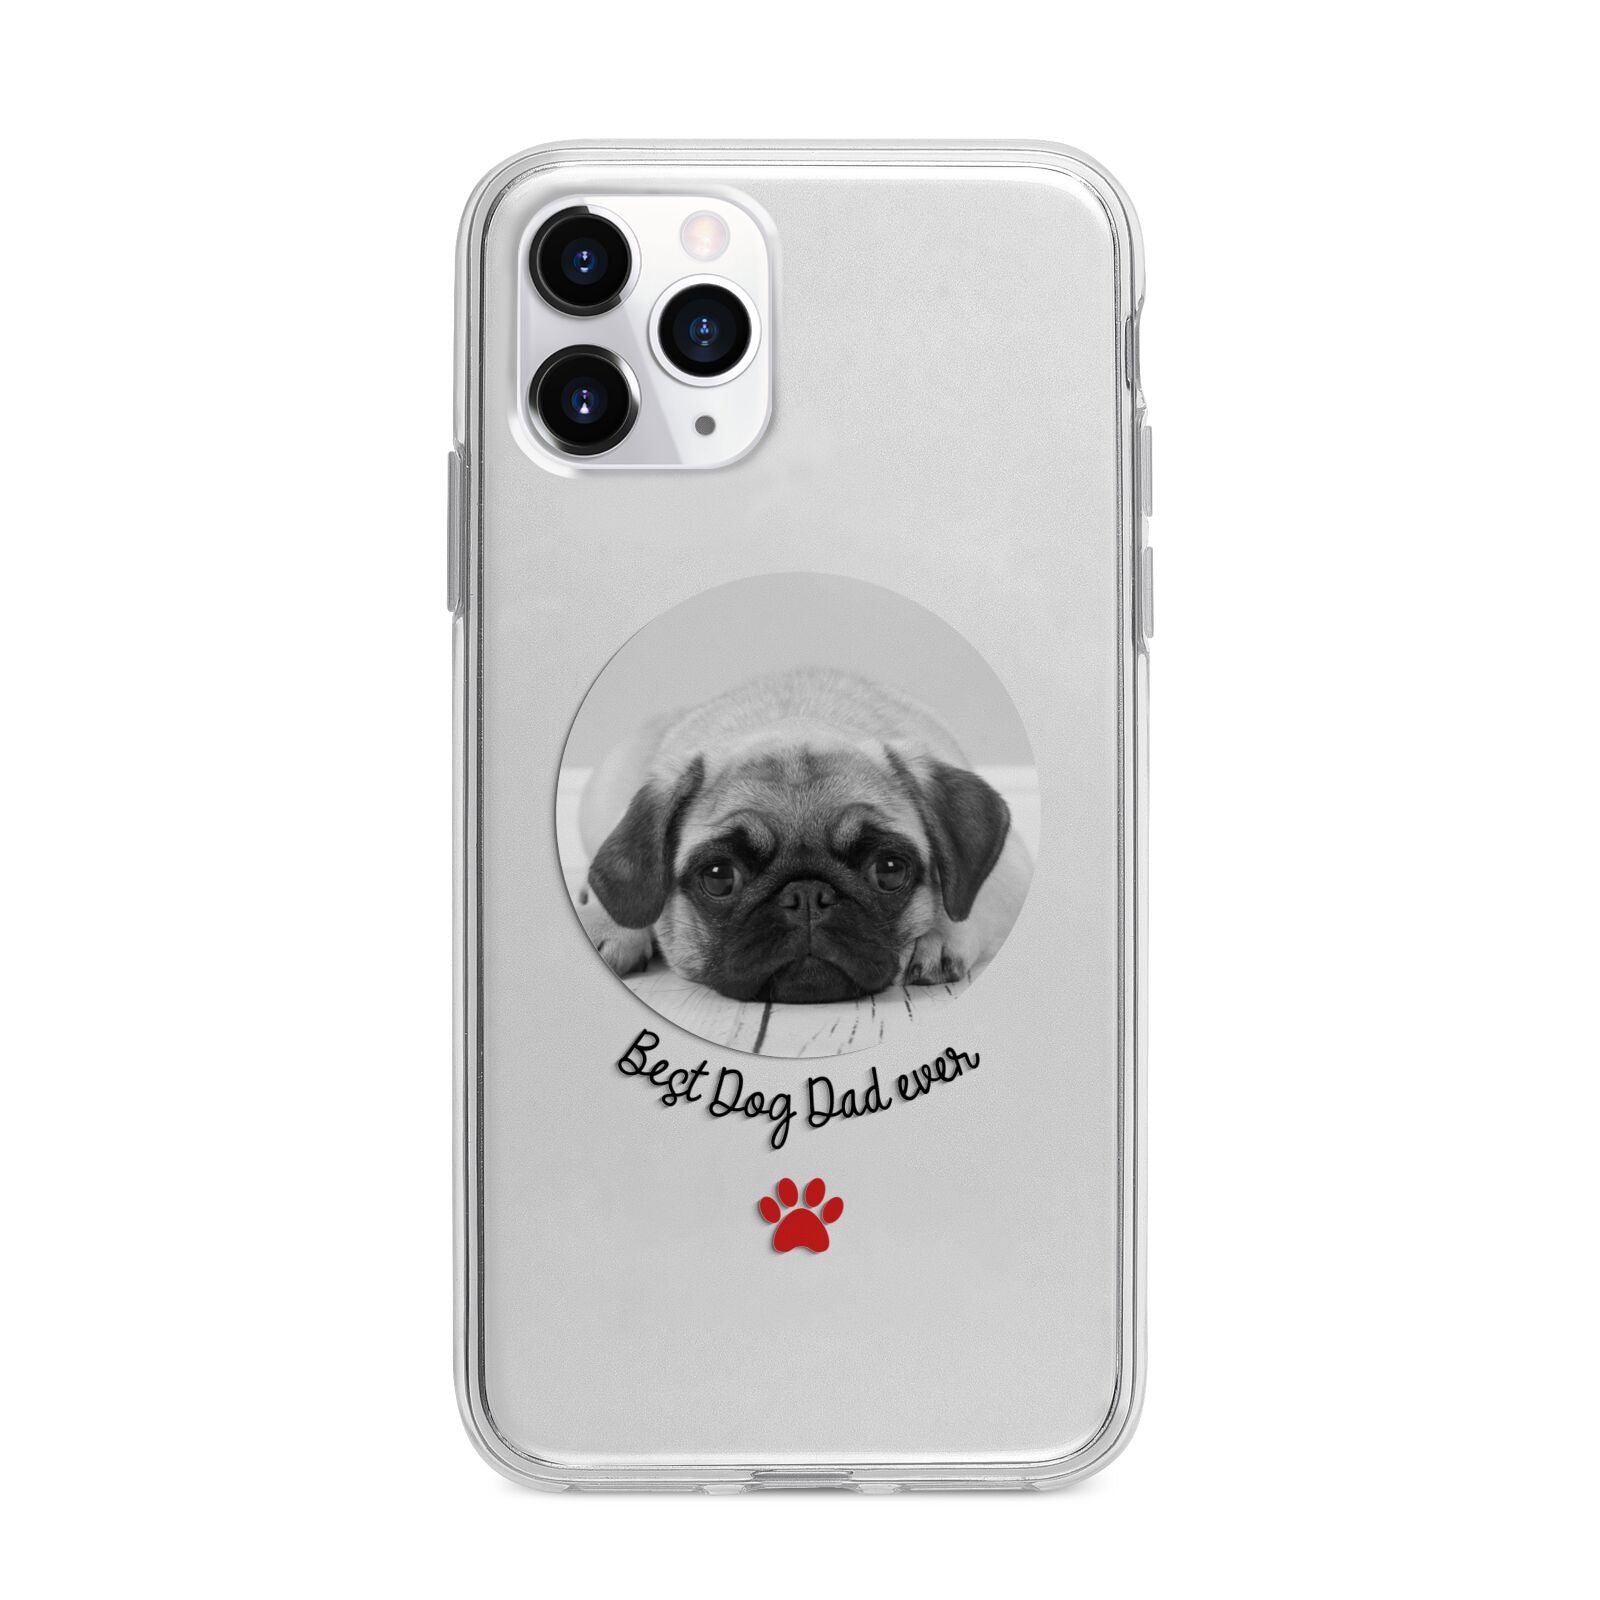 Best Dog Dad Ever Photo Upload Apple iPhone 11 Pro Max in Silver with Bumper Case